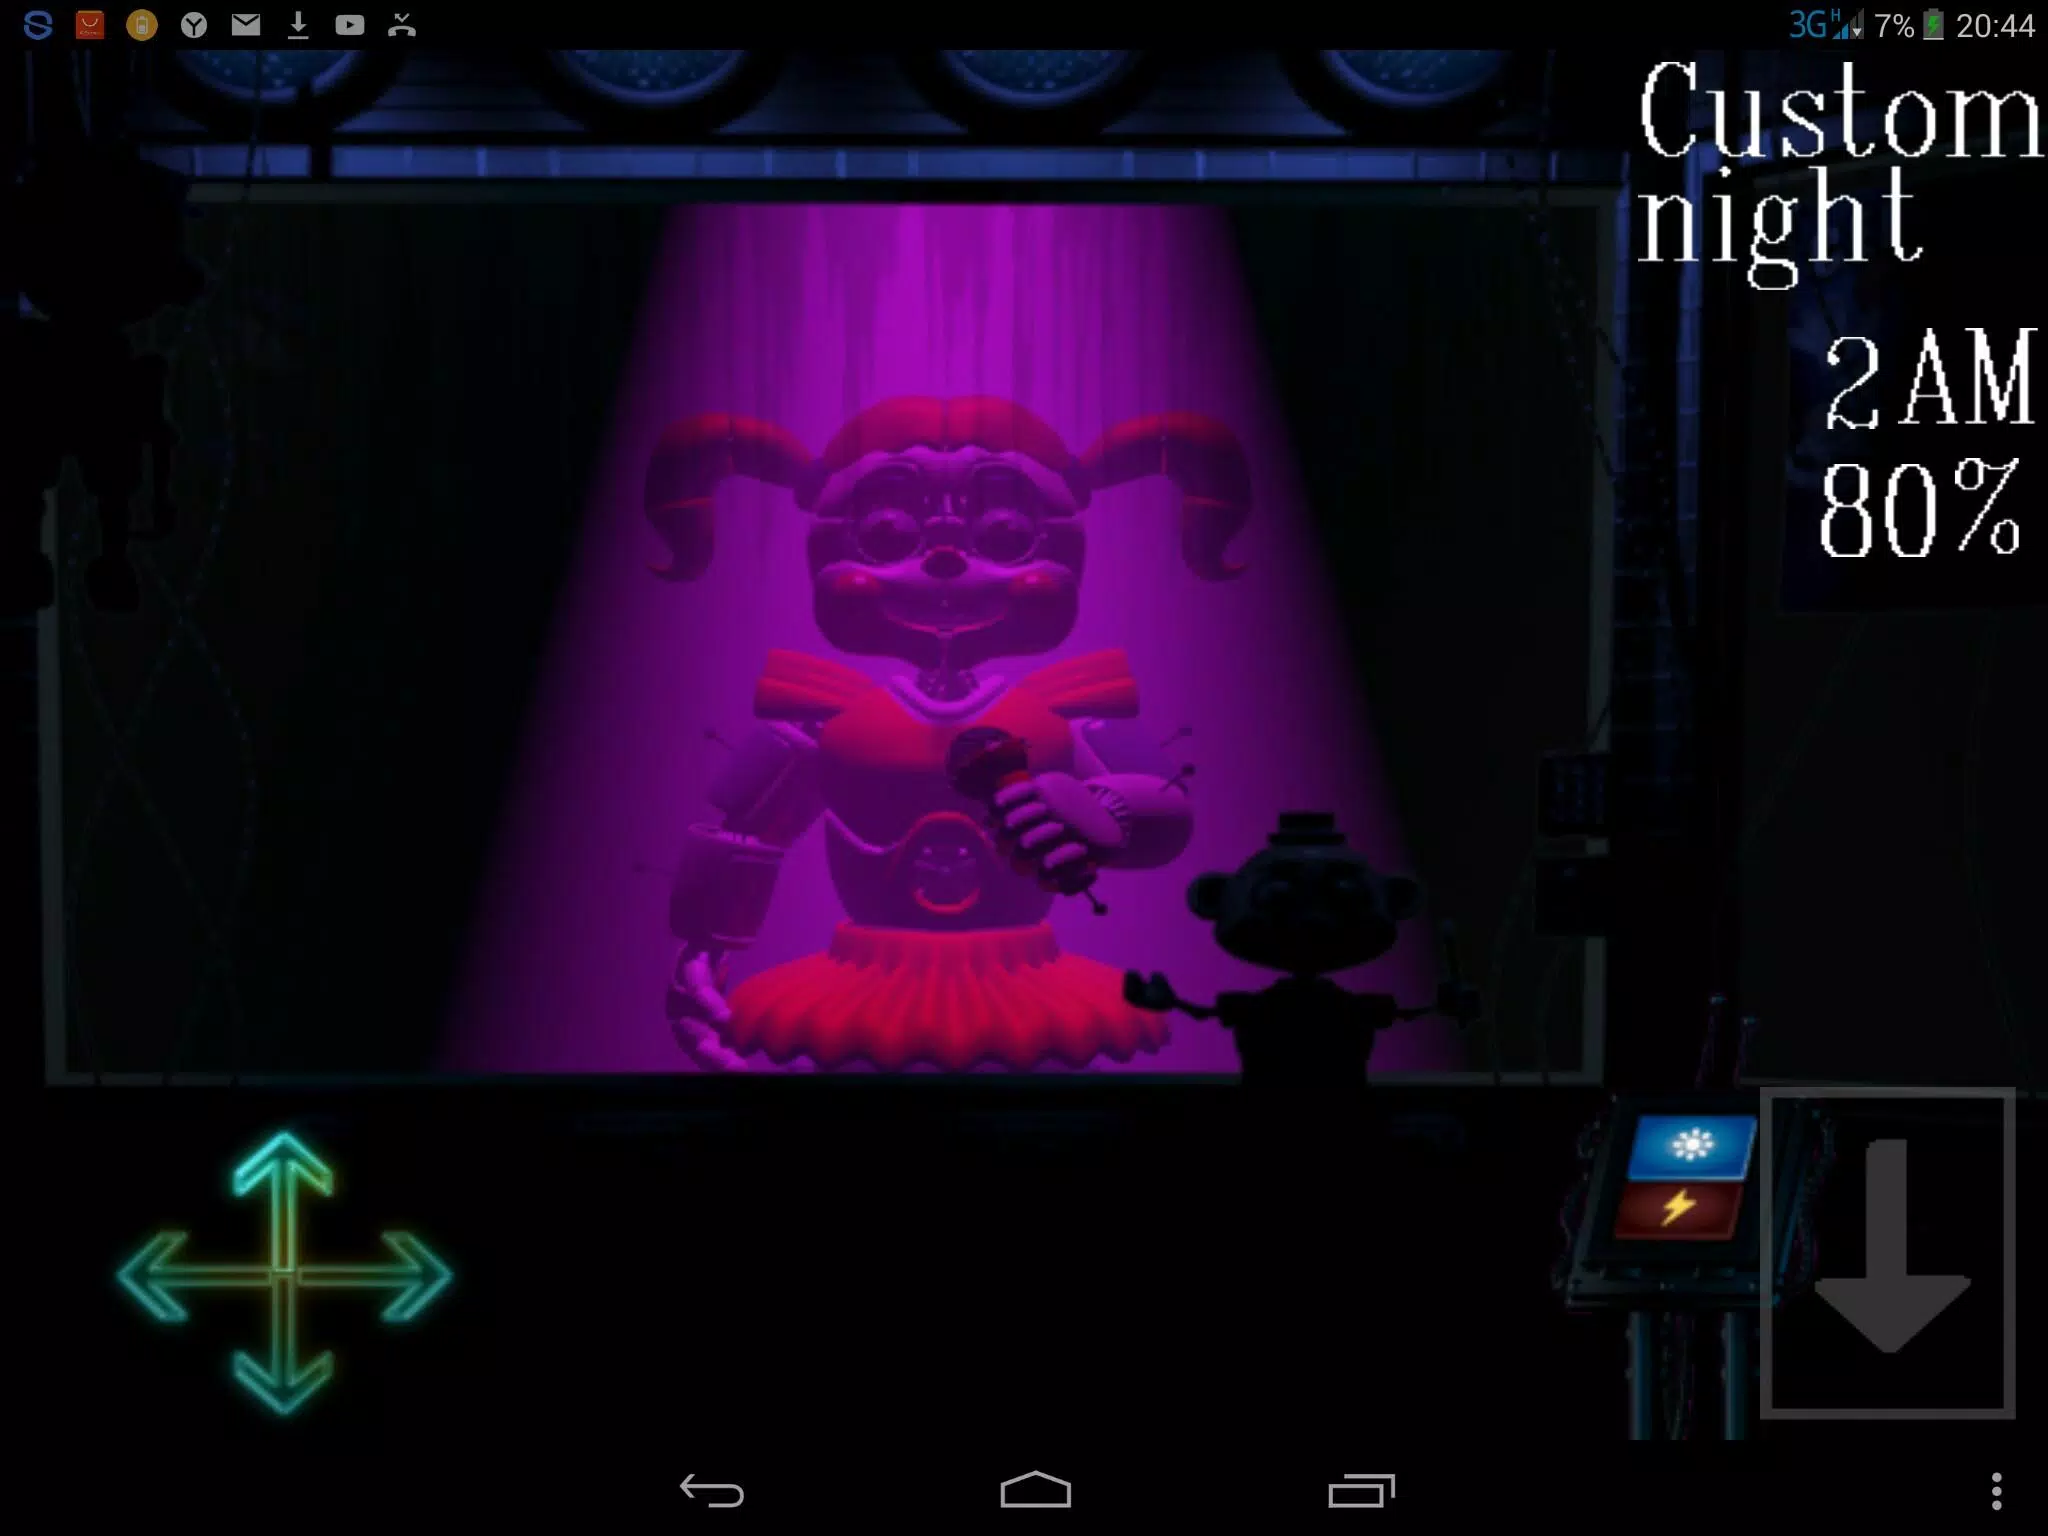 Ultimate Custom Night APK (Android Game) - Free Download